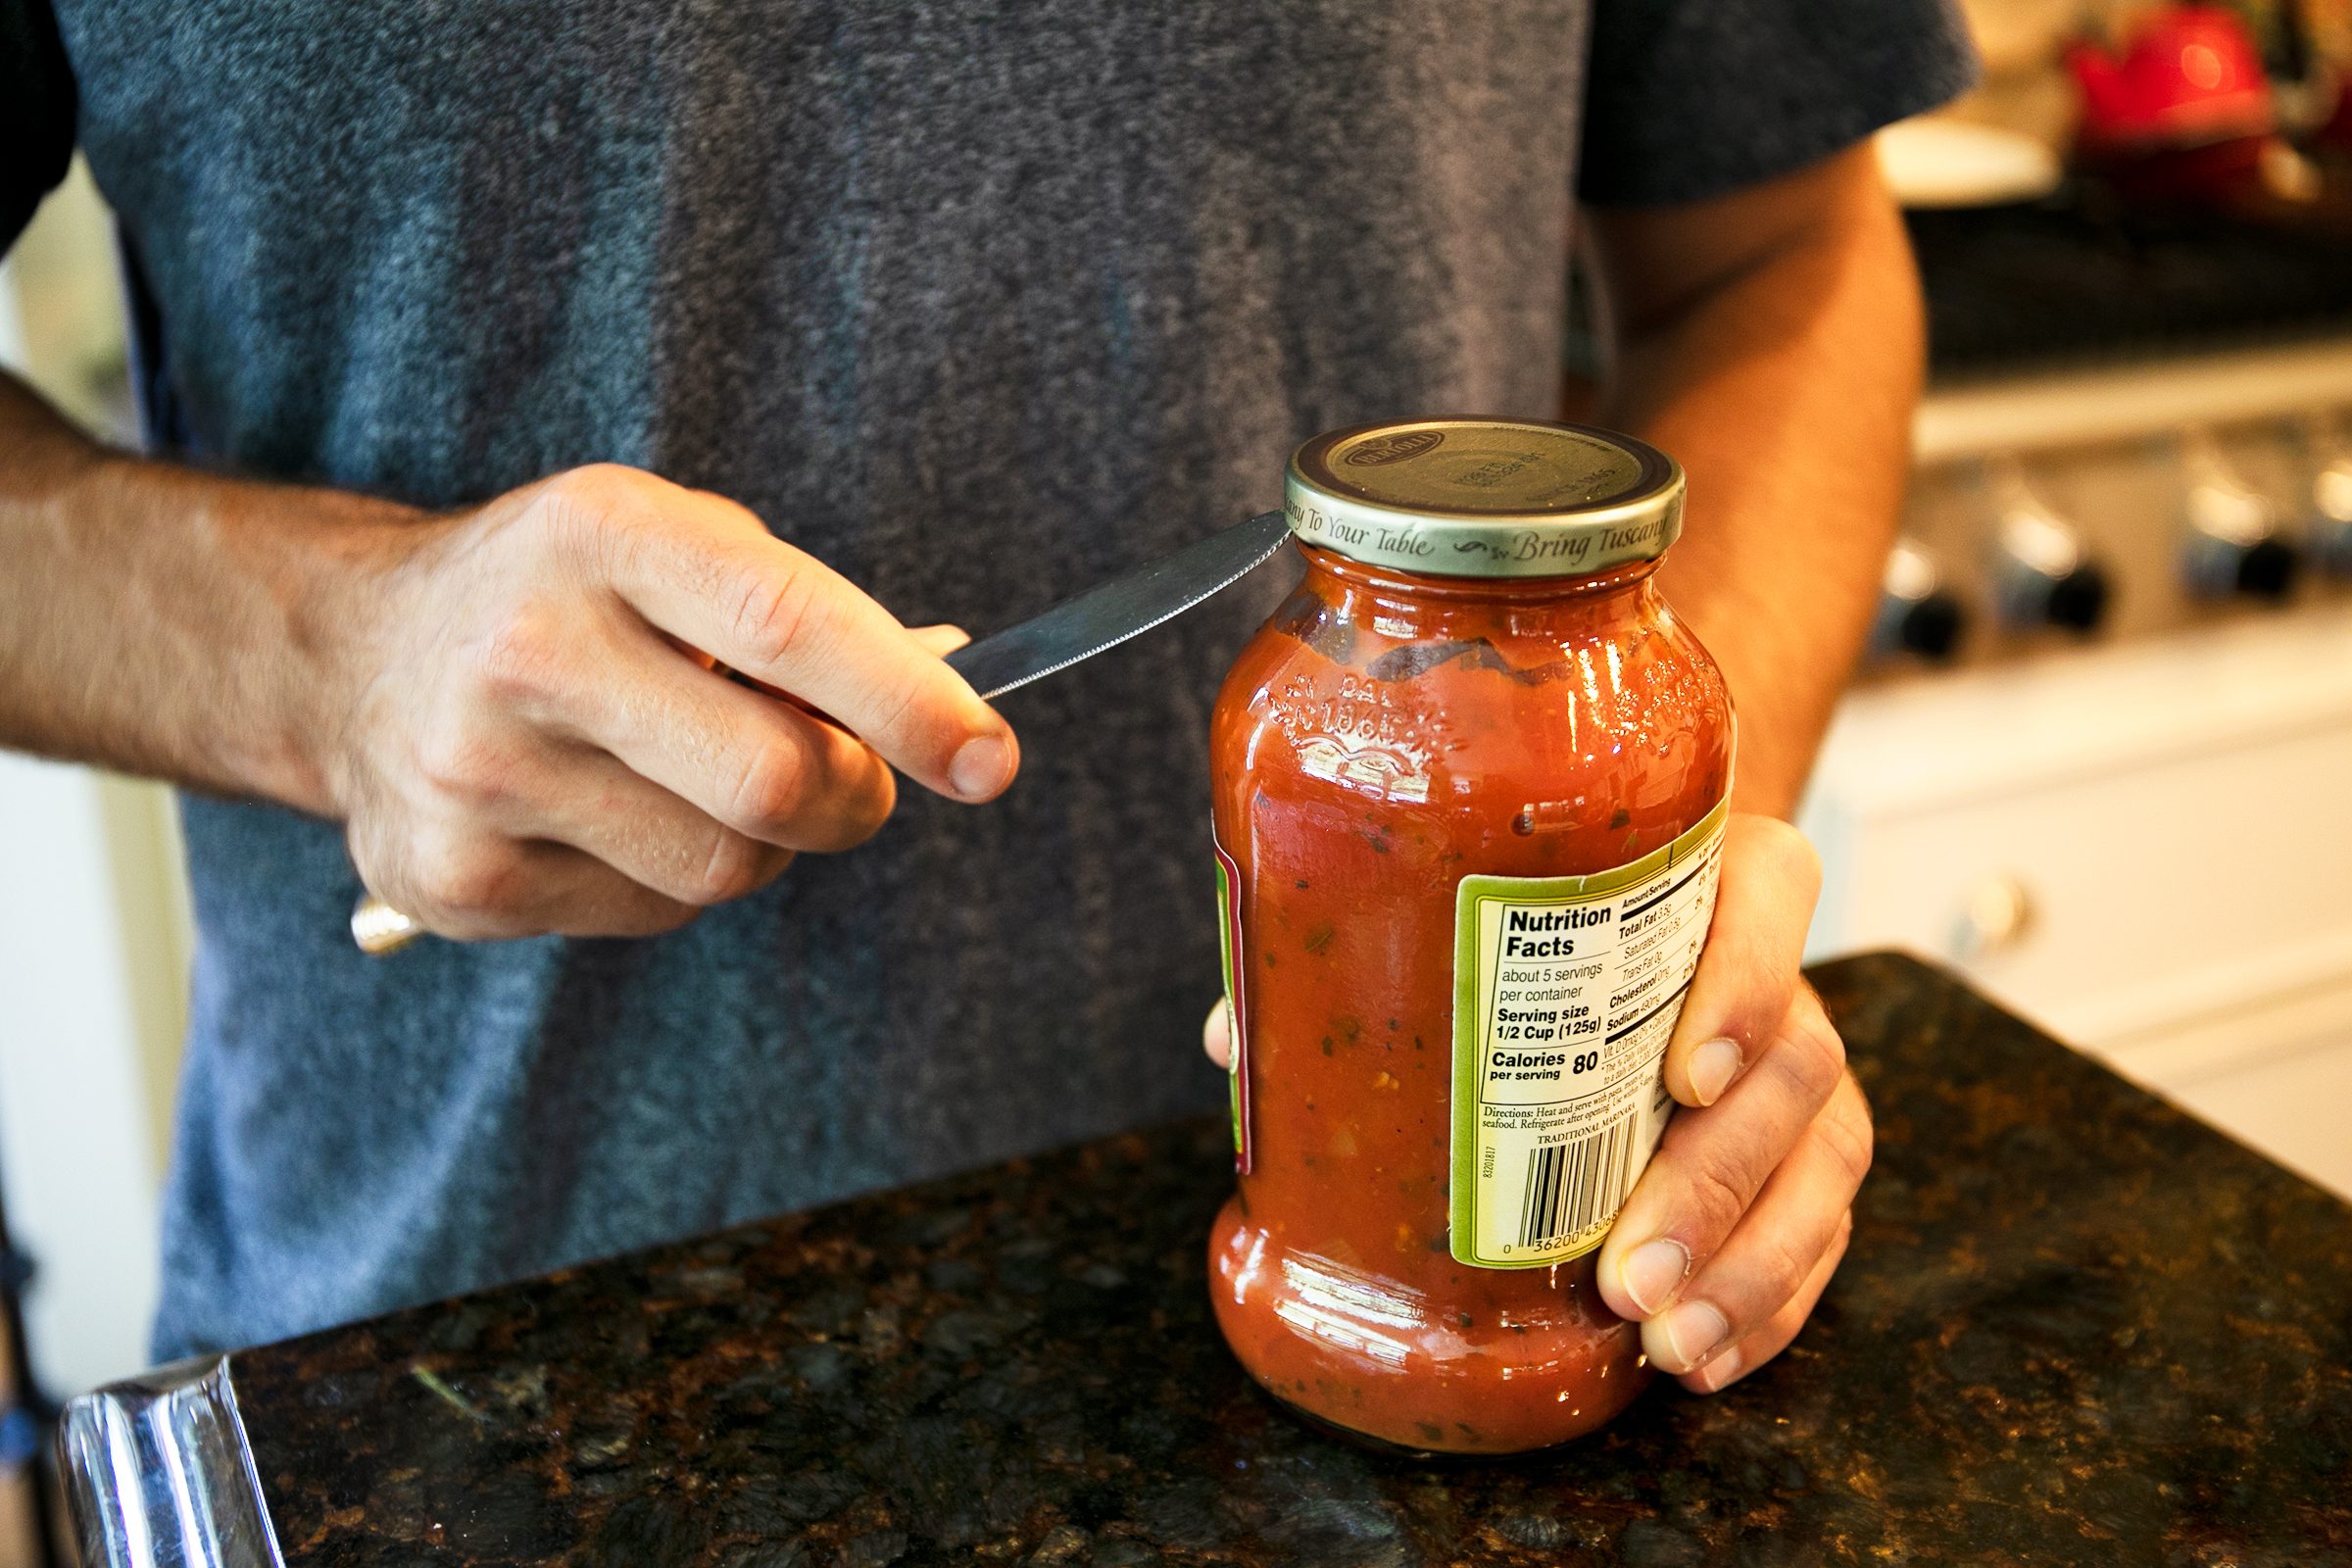 Under-Cabinet Jar Opener, NEVER struggle with opening jars again thanks to  this under-cabinet jar opener! 🤯👏 It's V-shape allows it to open any size  jar, and it sticks riiight